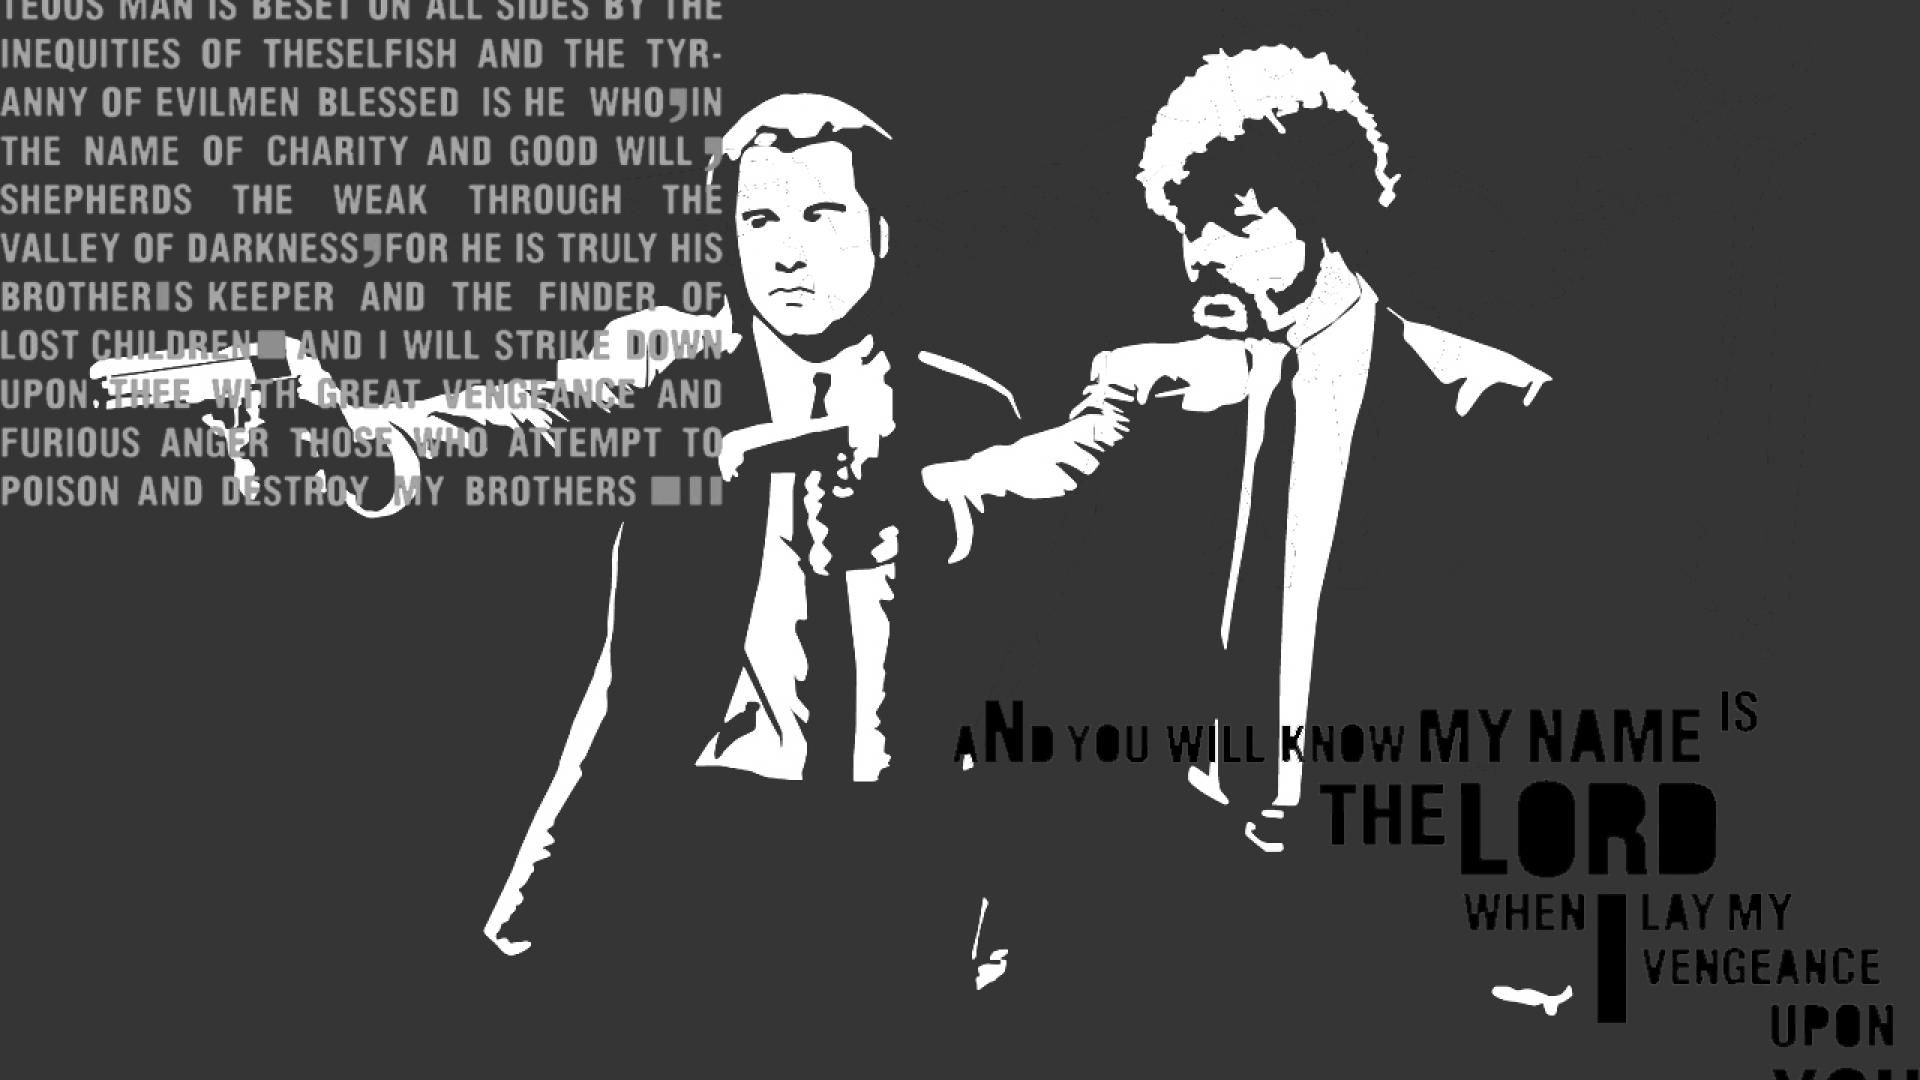 Pulp fiction quotes wallpaper - (#172778) - High Quality and ...